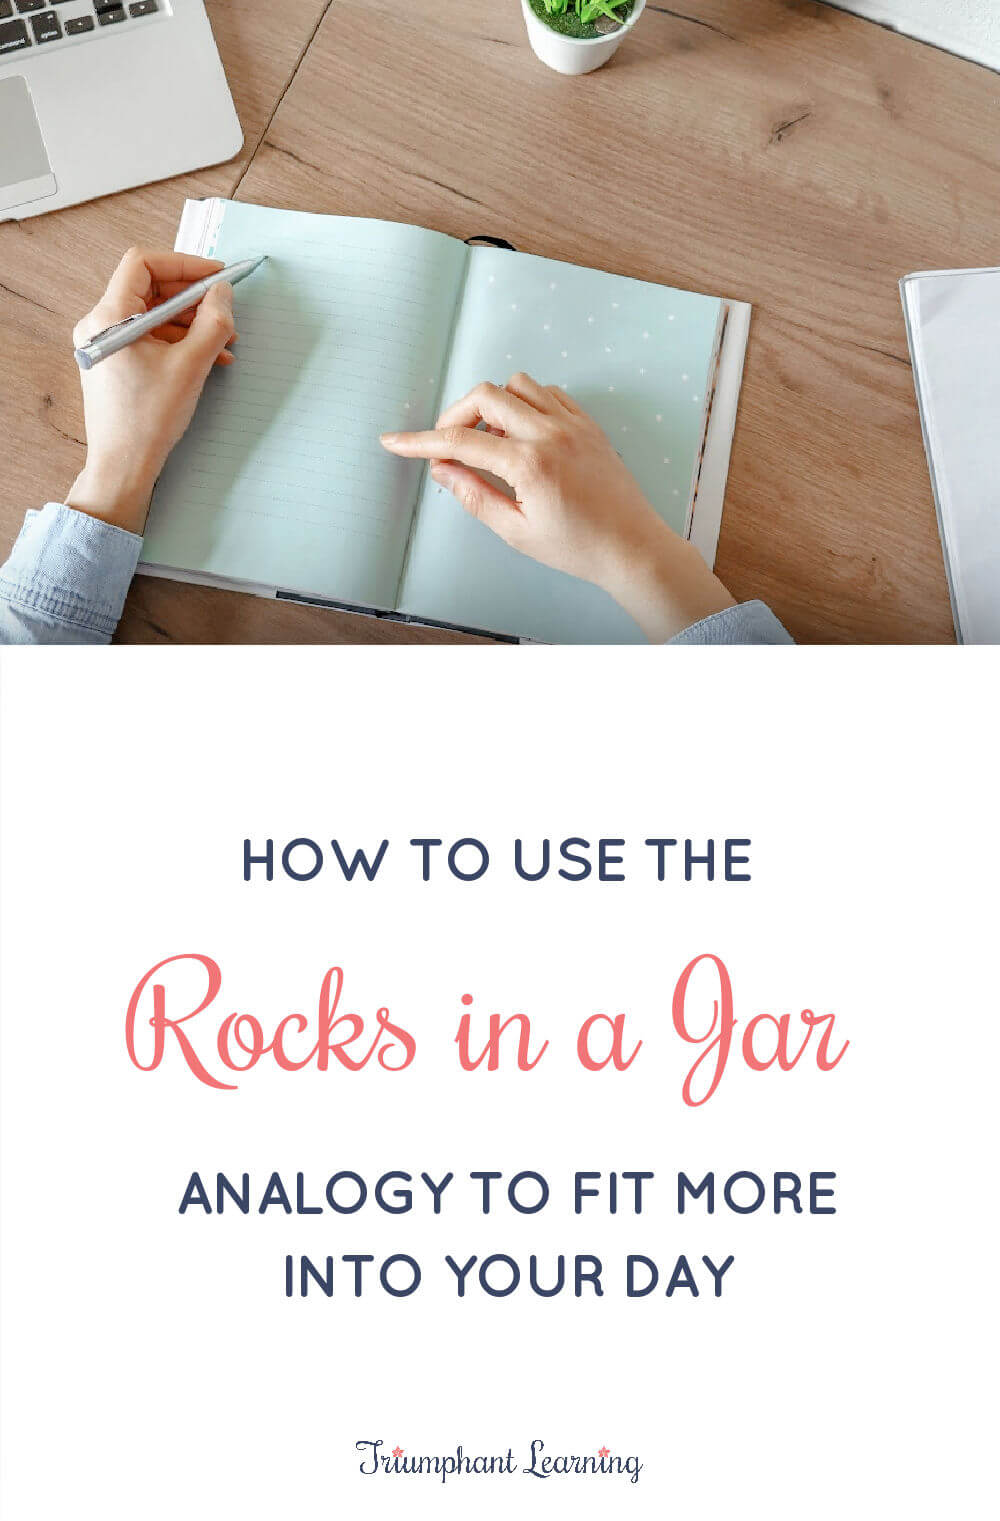 Use these two steps to apply the rocks in the jar analogy to get control of your days and do more of what matters to you. via @TriLearning